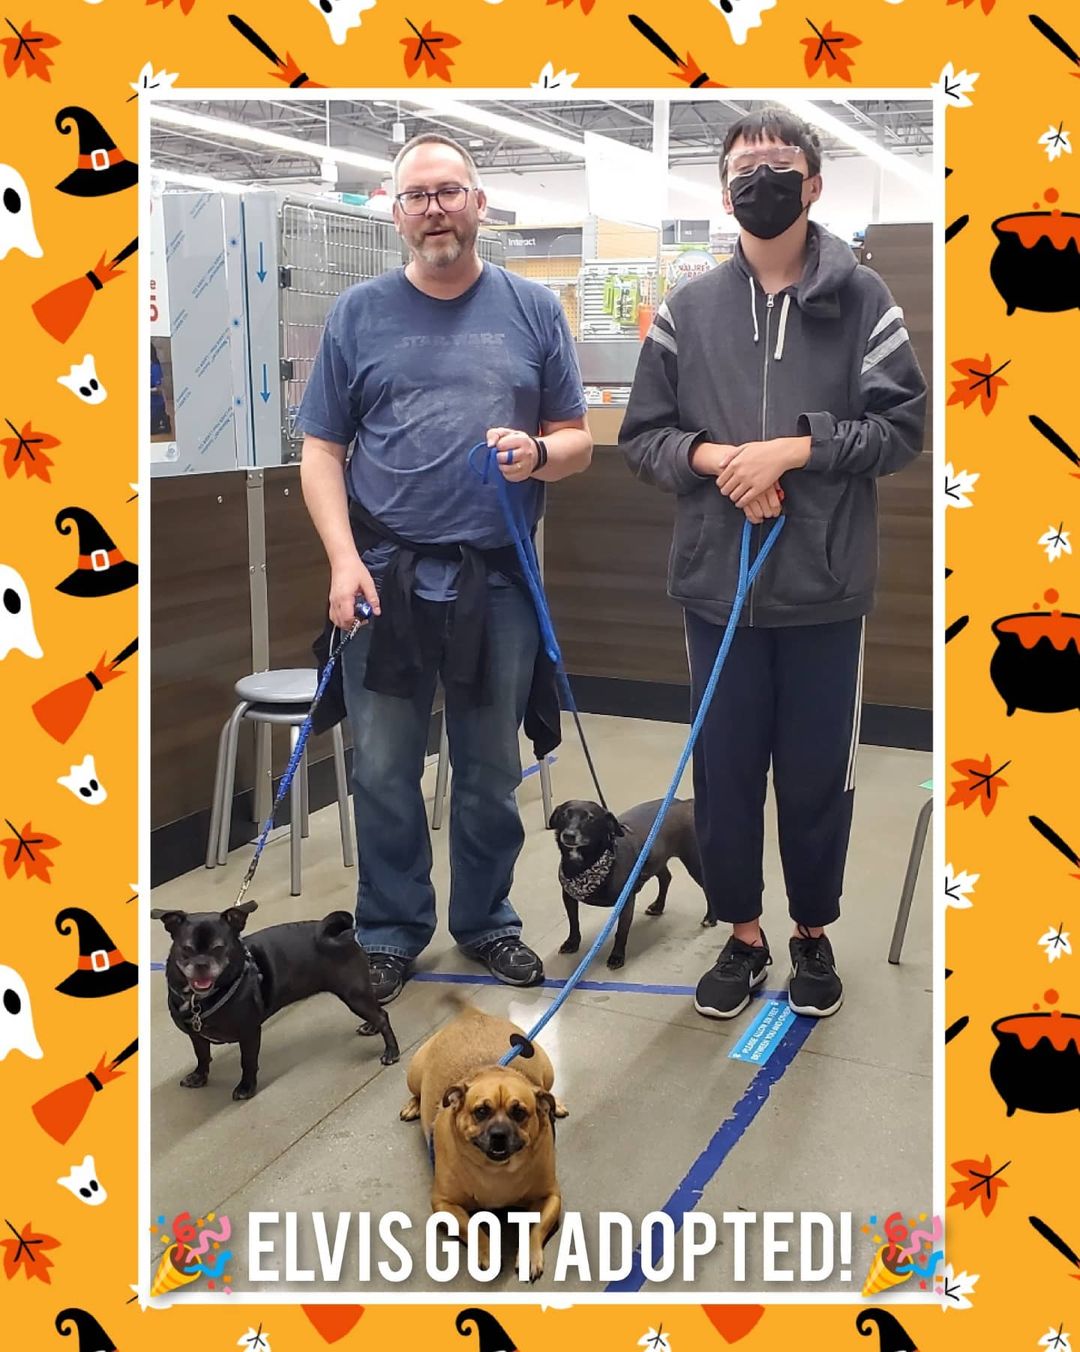 🎃🎉 Adoption Photos!! 🎉🎃

🎉Elvis has been adopted by the Harbour Family.  He now has 2 fur brothers and a human brother Max who love him so much!!

🎉Rip was adopted by Mimi. He has a new fur sister named Belle. His new mommy doesn't mind that Rip has no understanding of what personal space is. Lol

🎉Gidget was adopted by the Standiford's. They are completely in love and will give her the best life.

🐾Thank you to these families who couldn't be more of a perfect fit for there new fur family member. 🥰 🐾

<a target='_blank' href='https://www.instagram.com/explore/tags/adoptionsaveslives/'>#adoptionsaveslives</a> <a target='_blank' href='https://www.instagram.com/explore/tags/bakersfield/'>#bakersfield</a> <a target='_blank' href='https://www.instagram.com/explore/tags/kerncounty/'>#kerncounty</a> <a target='_blank' href='https://www.instagram.com/explore/tags/makingadifference/'>#makingadifference</a> <a target='_blank' href='https://www.instagram.com/explore/tags/furfriends4life/'>#furfriends4life</a> <a target='_blank' href='https://www.instagram.com/explore/tags/nonprofitrescue/'>#nonprofitrescue</a> <a target='_blank' href='https://www.instagram.com/explore/tags/doglovers/'>#doglovers</a> <a target='_blank' href='https://www.instagram.com/explore/tags/animallovers/'>#animallovers</a> <a target='_blank' href='https://www.instagram.com/explore/tags/happysunday/'>#happysunday</a> <a target='_blank' href='https://www.instagram.com/explore/tags/happyfaces/'>#happyfaces</a> <a target='_blank' href='https://www.instagram.com/explore/tags/newfamilymember/'>#newfamilymember</a> <a target='_blank' href='https://www.instagram.com/explore/tags/elvis/'>#elvis</a> <a target='_blank' href='https://www.instagram.com/explore/tags/rip/'>#rip</a> <a target='_blank' href='https://www.instagram.com/explore/tags/gidget/'>#gidget</a> <a target='_blank' href='https://www.instagram.com/explore/tags/volunteers/'>#volunteers</a> <a target='_blank' href='https://www.instagram.com/explore/tags/donations/'>#donations</a> <a target='_blank' href='https://www.instagram.com/explore/tags/like/'>#like</a> <a target='_blank' href='https://www.instagram.com/explore/tags/share/'>#share</a> <a target='_blank' href='https://www.instagram.com/explore/tags/bekind/'>#bekind</a> <a target='_blank' href='https://www.instagram.com/explore/tags/october/'>#october</a> <a target='_blank' href='https://www.instagram.com/explore/tags/halloween/'>#halloween</a>